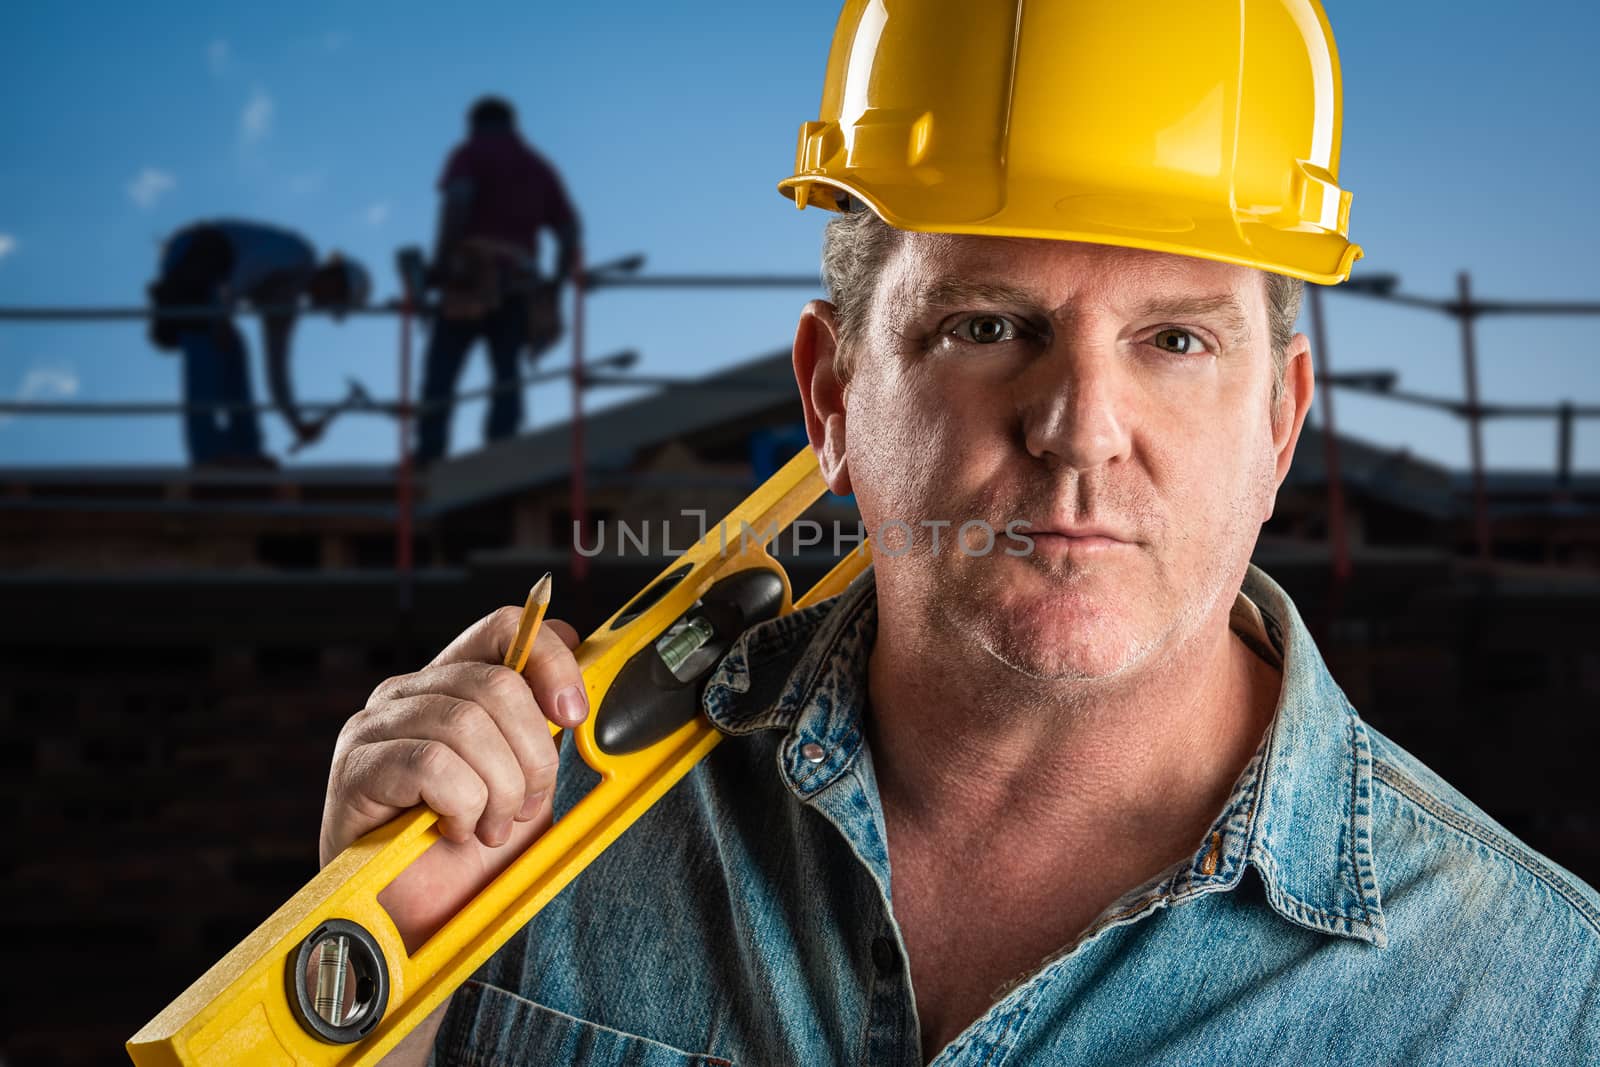 Serious Contractor in Hard Hat Holding Level and Pencil At Construction Site. by Feverpitched